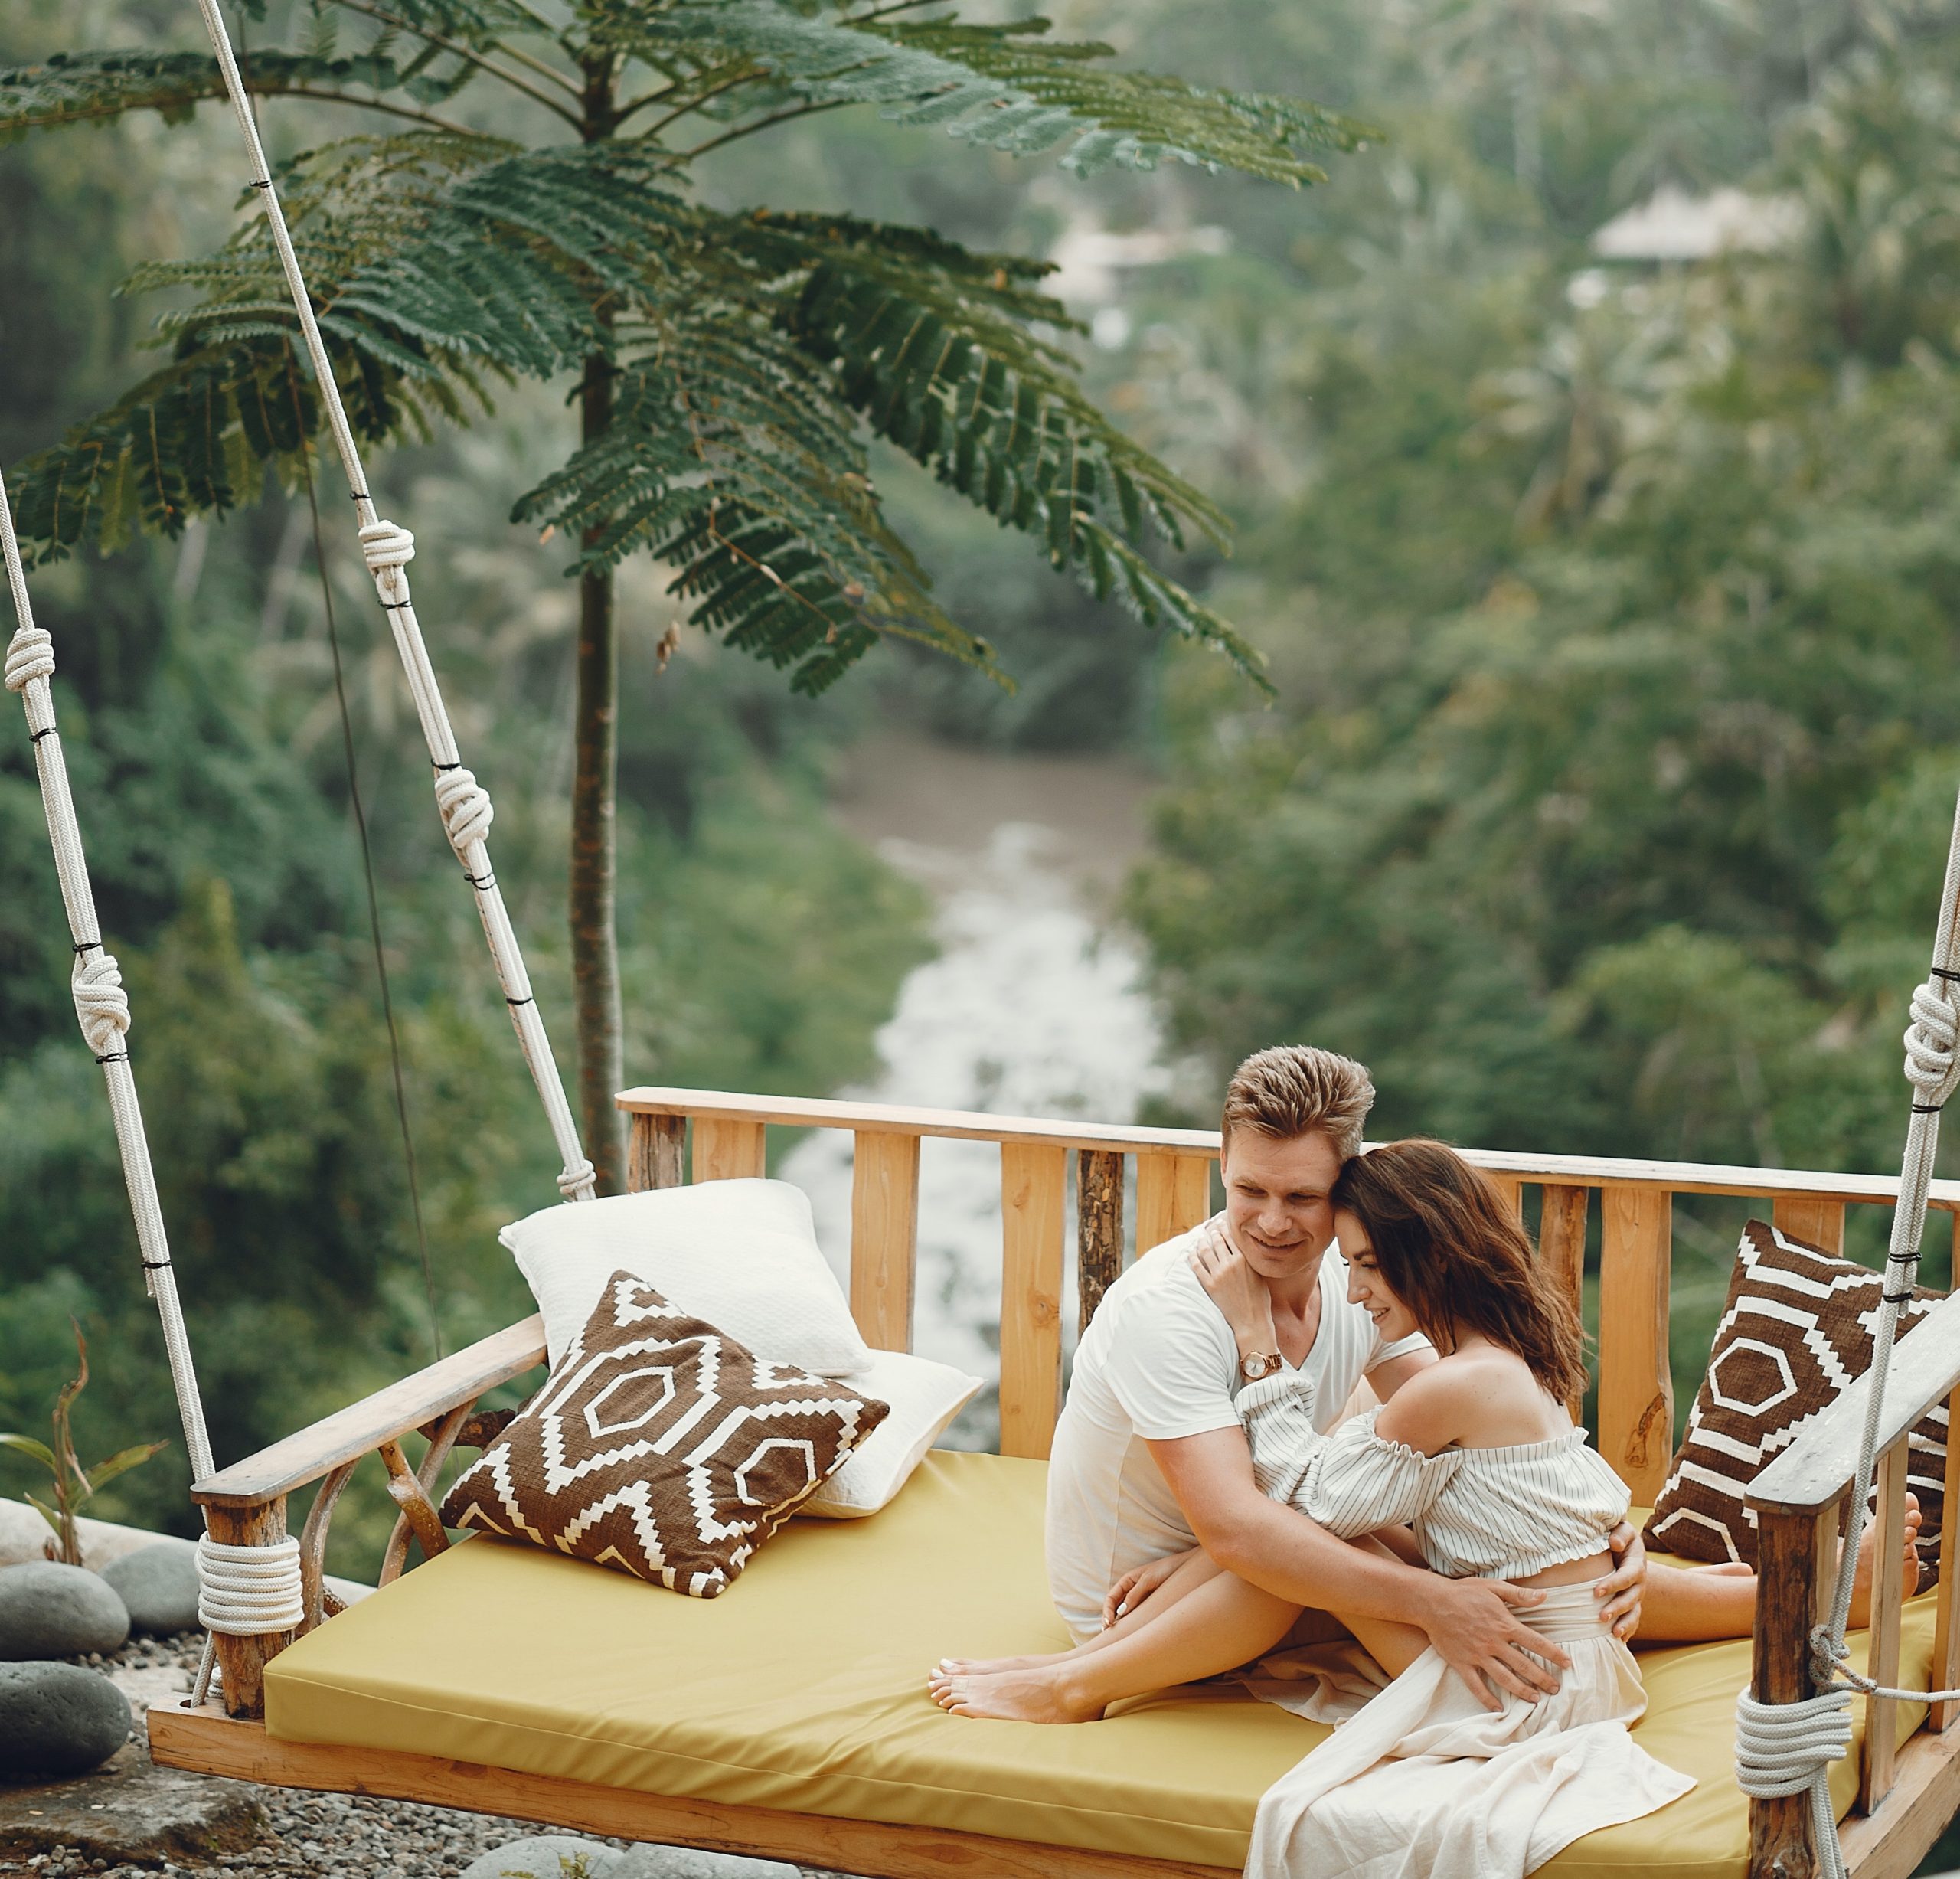 Honeymoon Trip Advice and Selection: Creating Unforgettable Memories